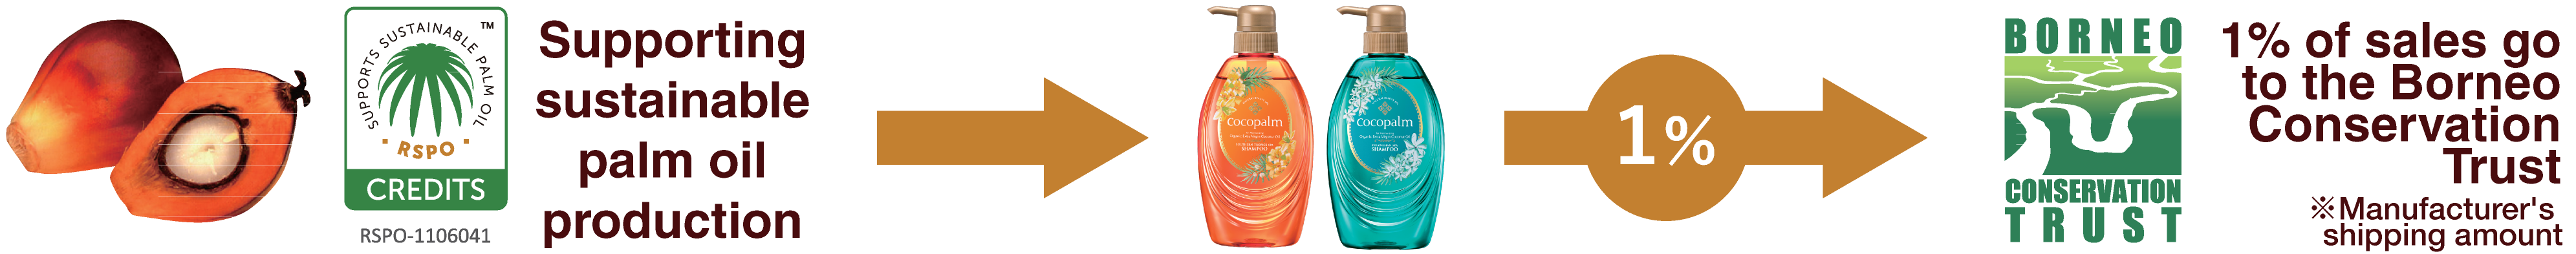 Cocopalm supports sustainable palm oil production and donates  1% of all sales to the Borneo Conservation Trust.